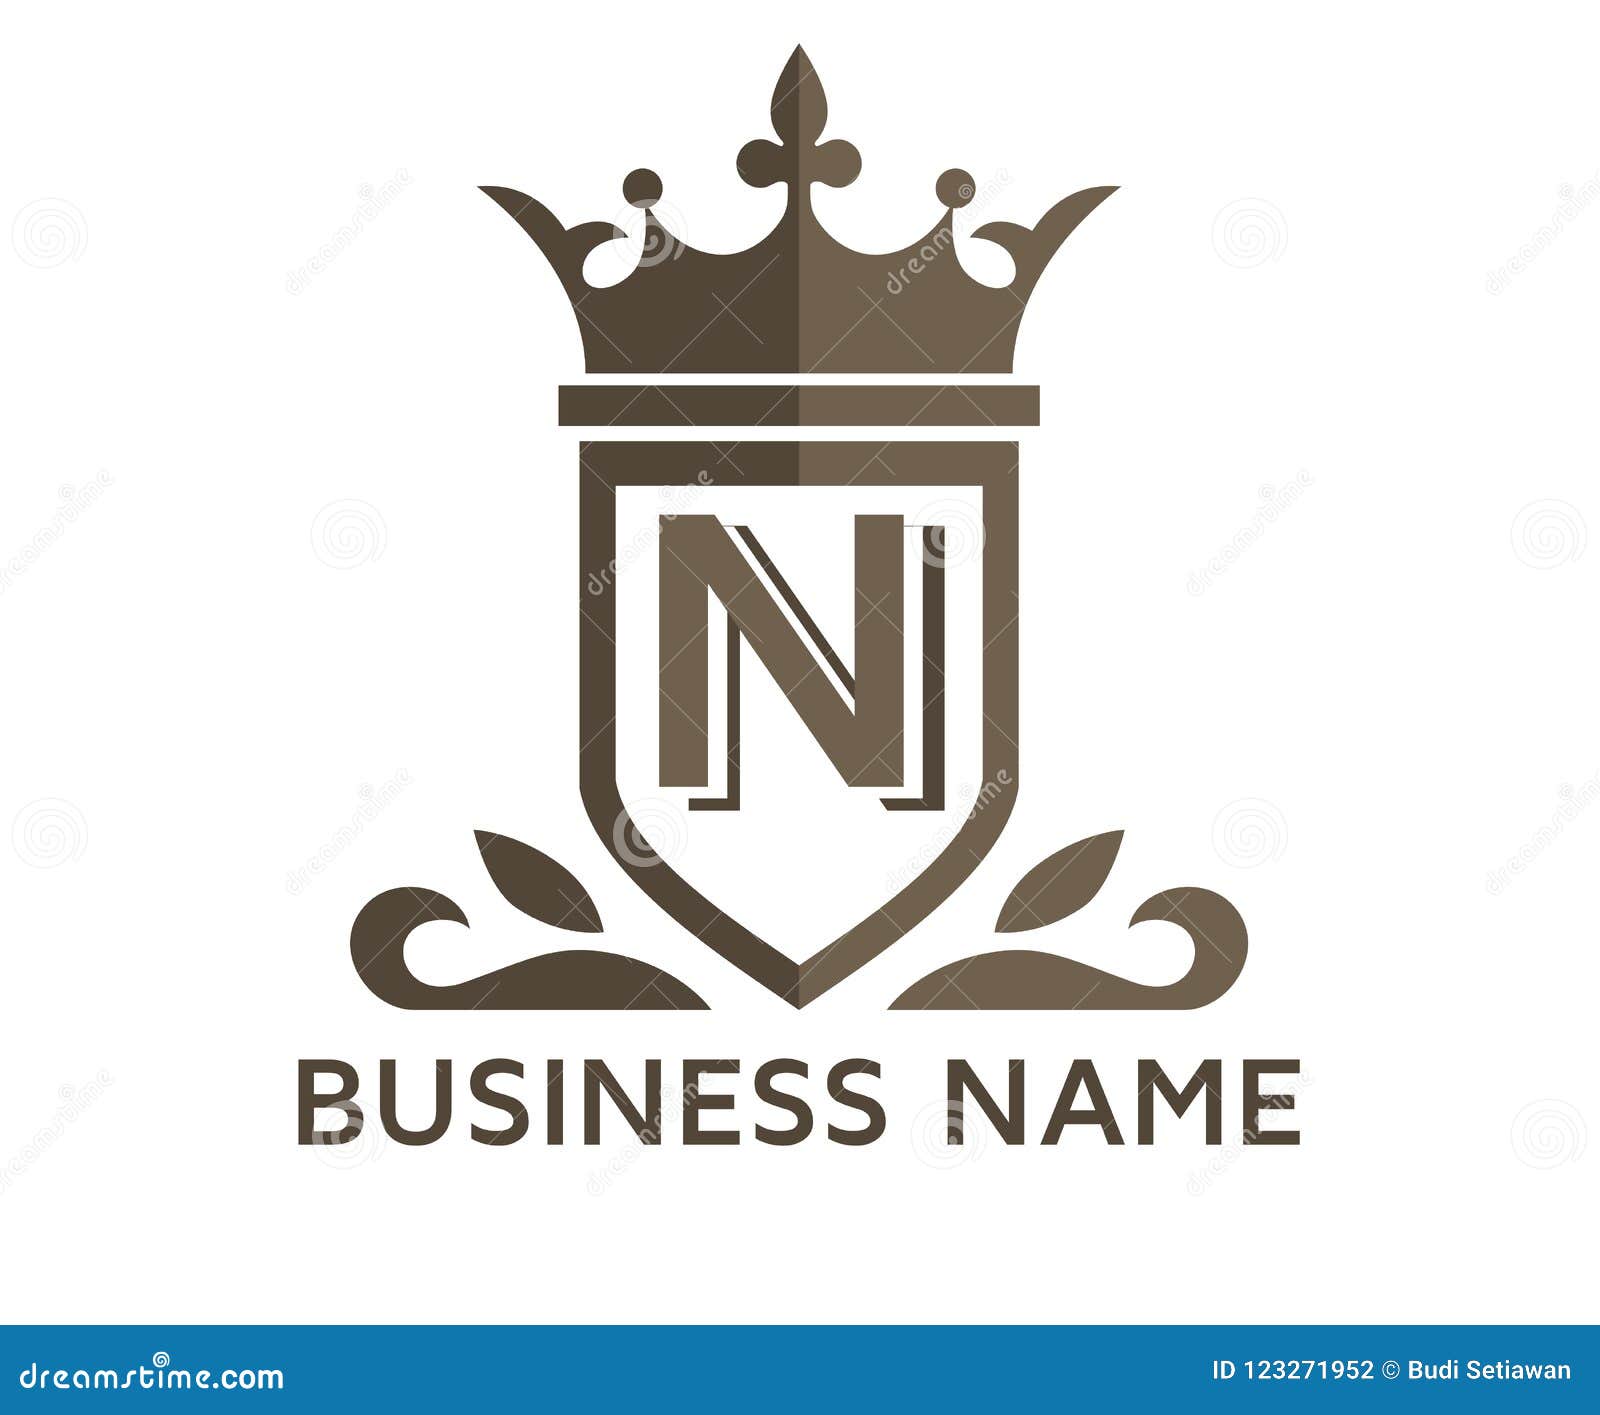 N simple shield stock vector. Illustration of label - 123271952